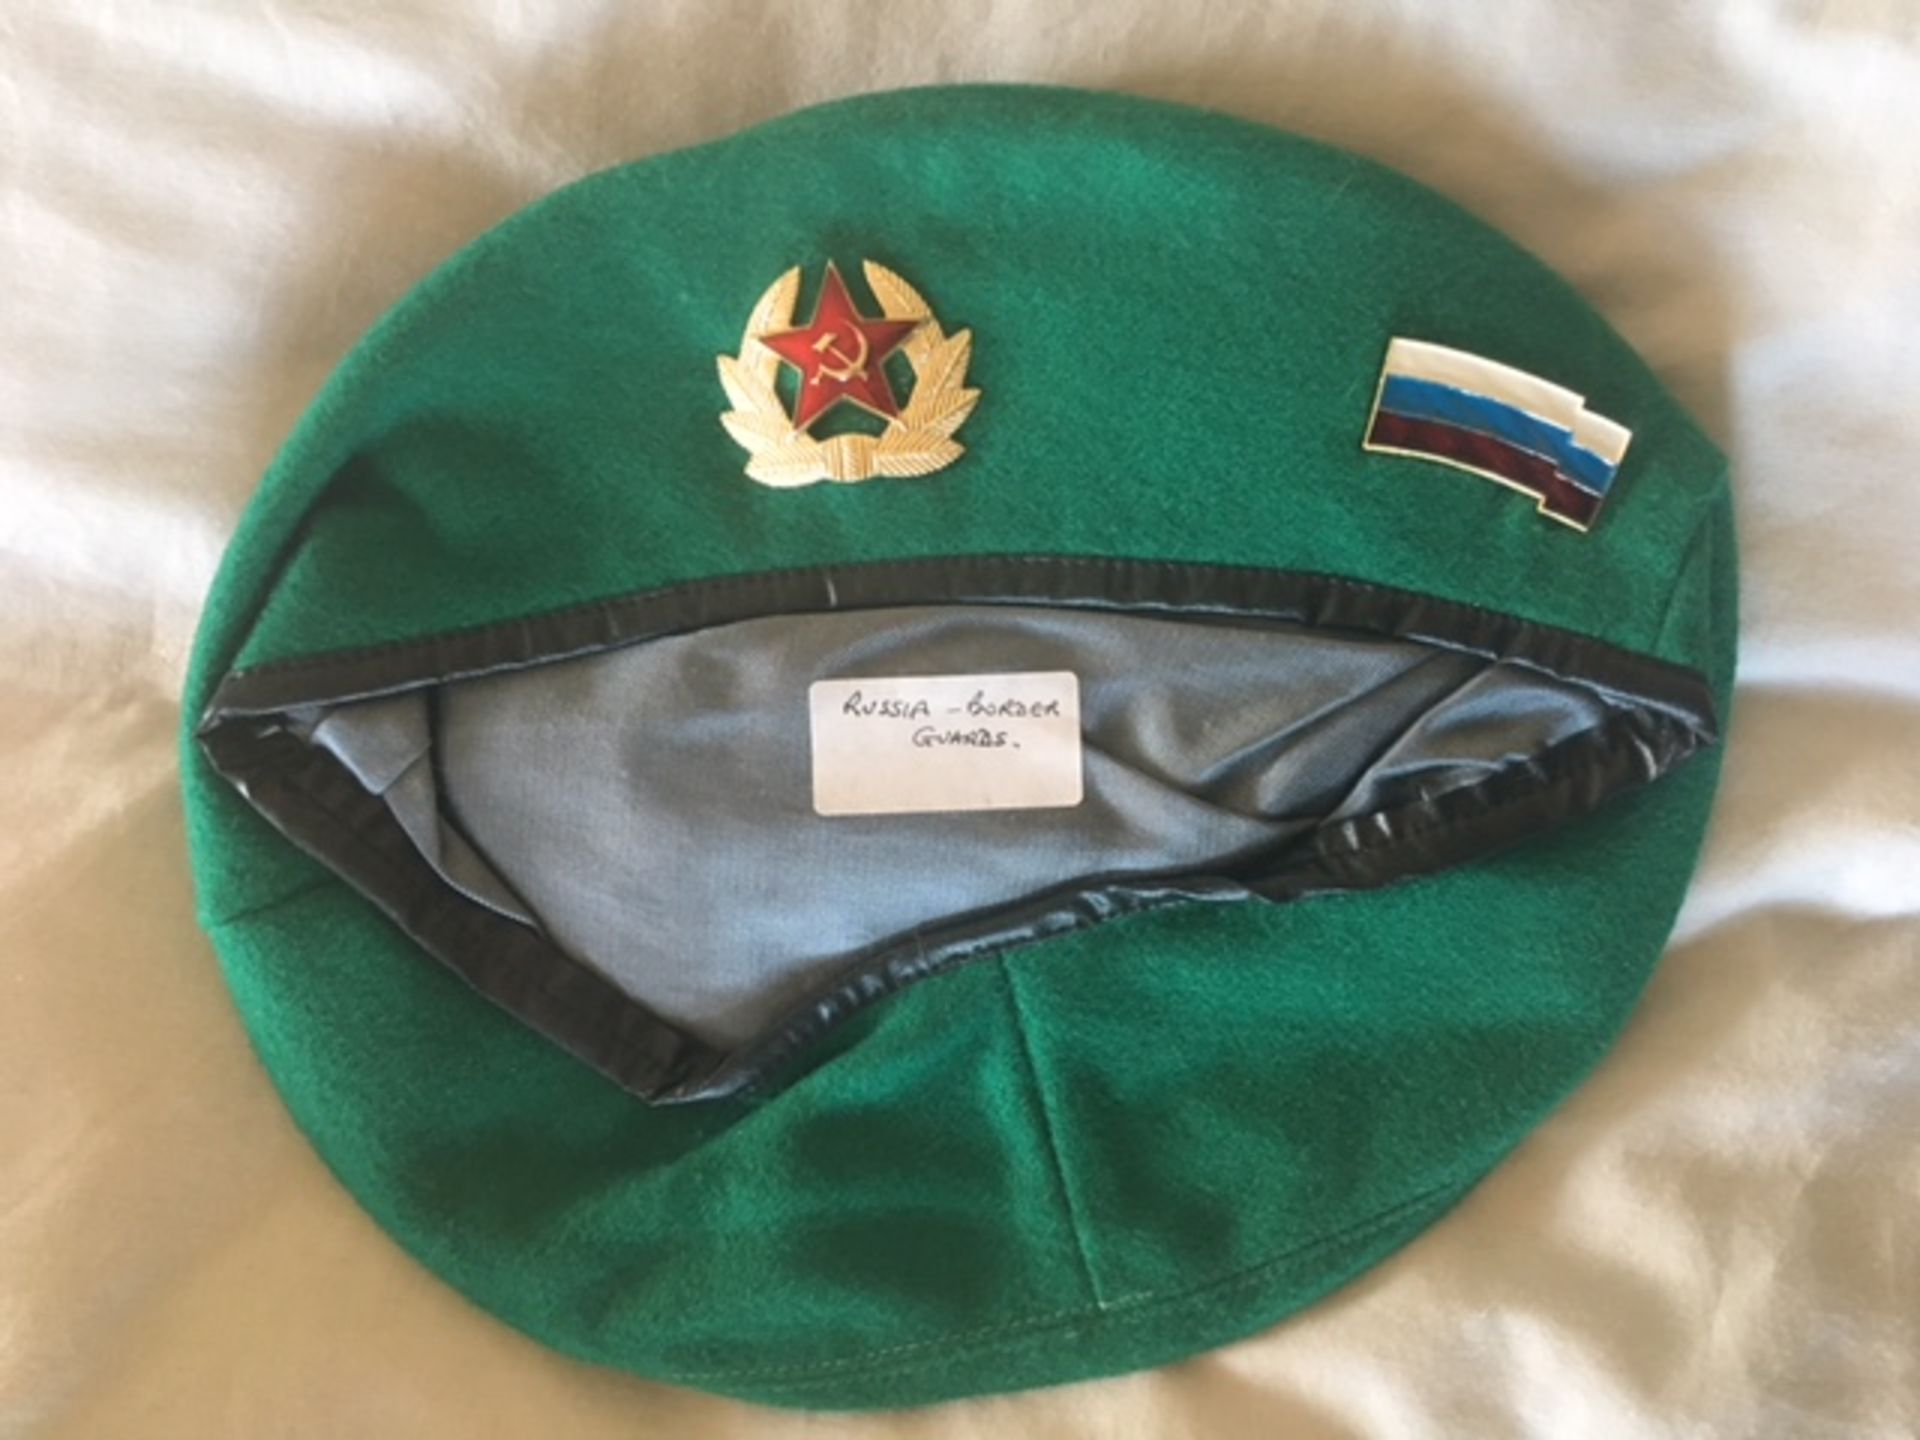 russia-border guards beret - Image 2 of 2